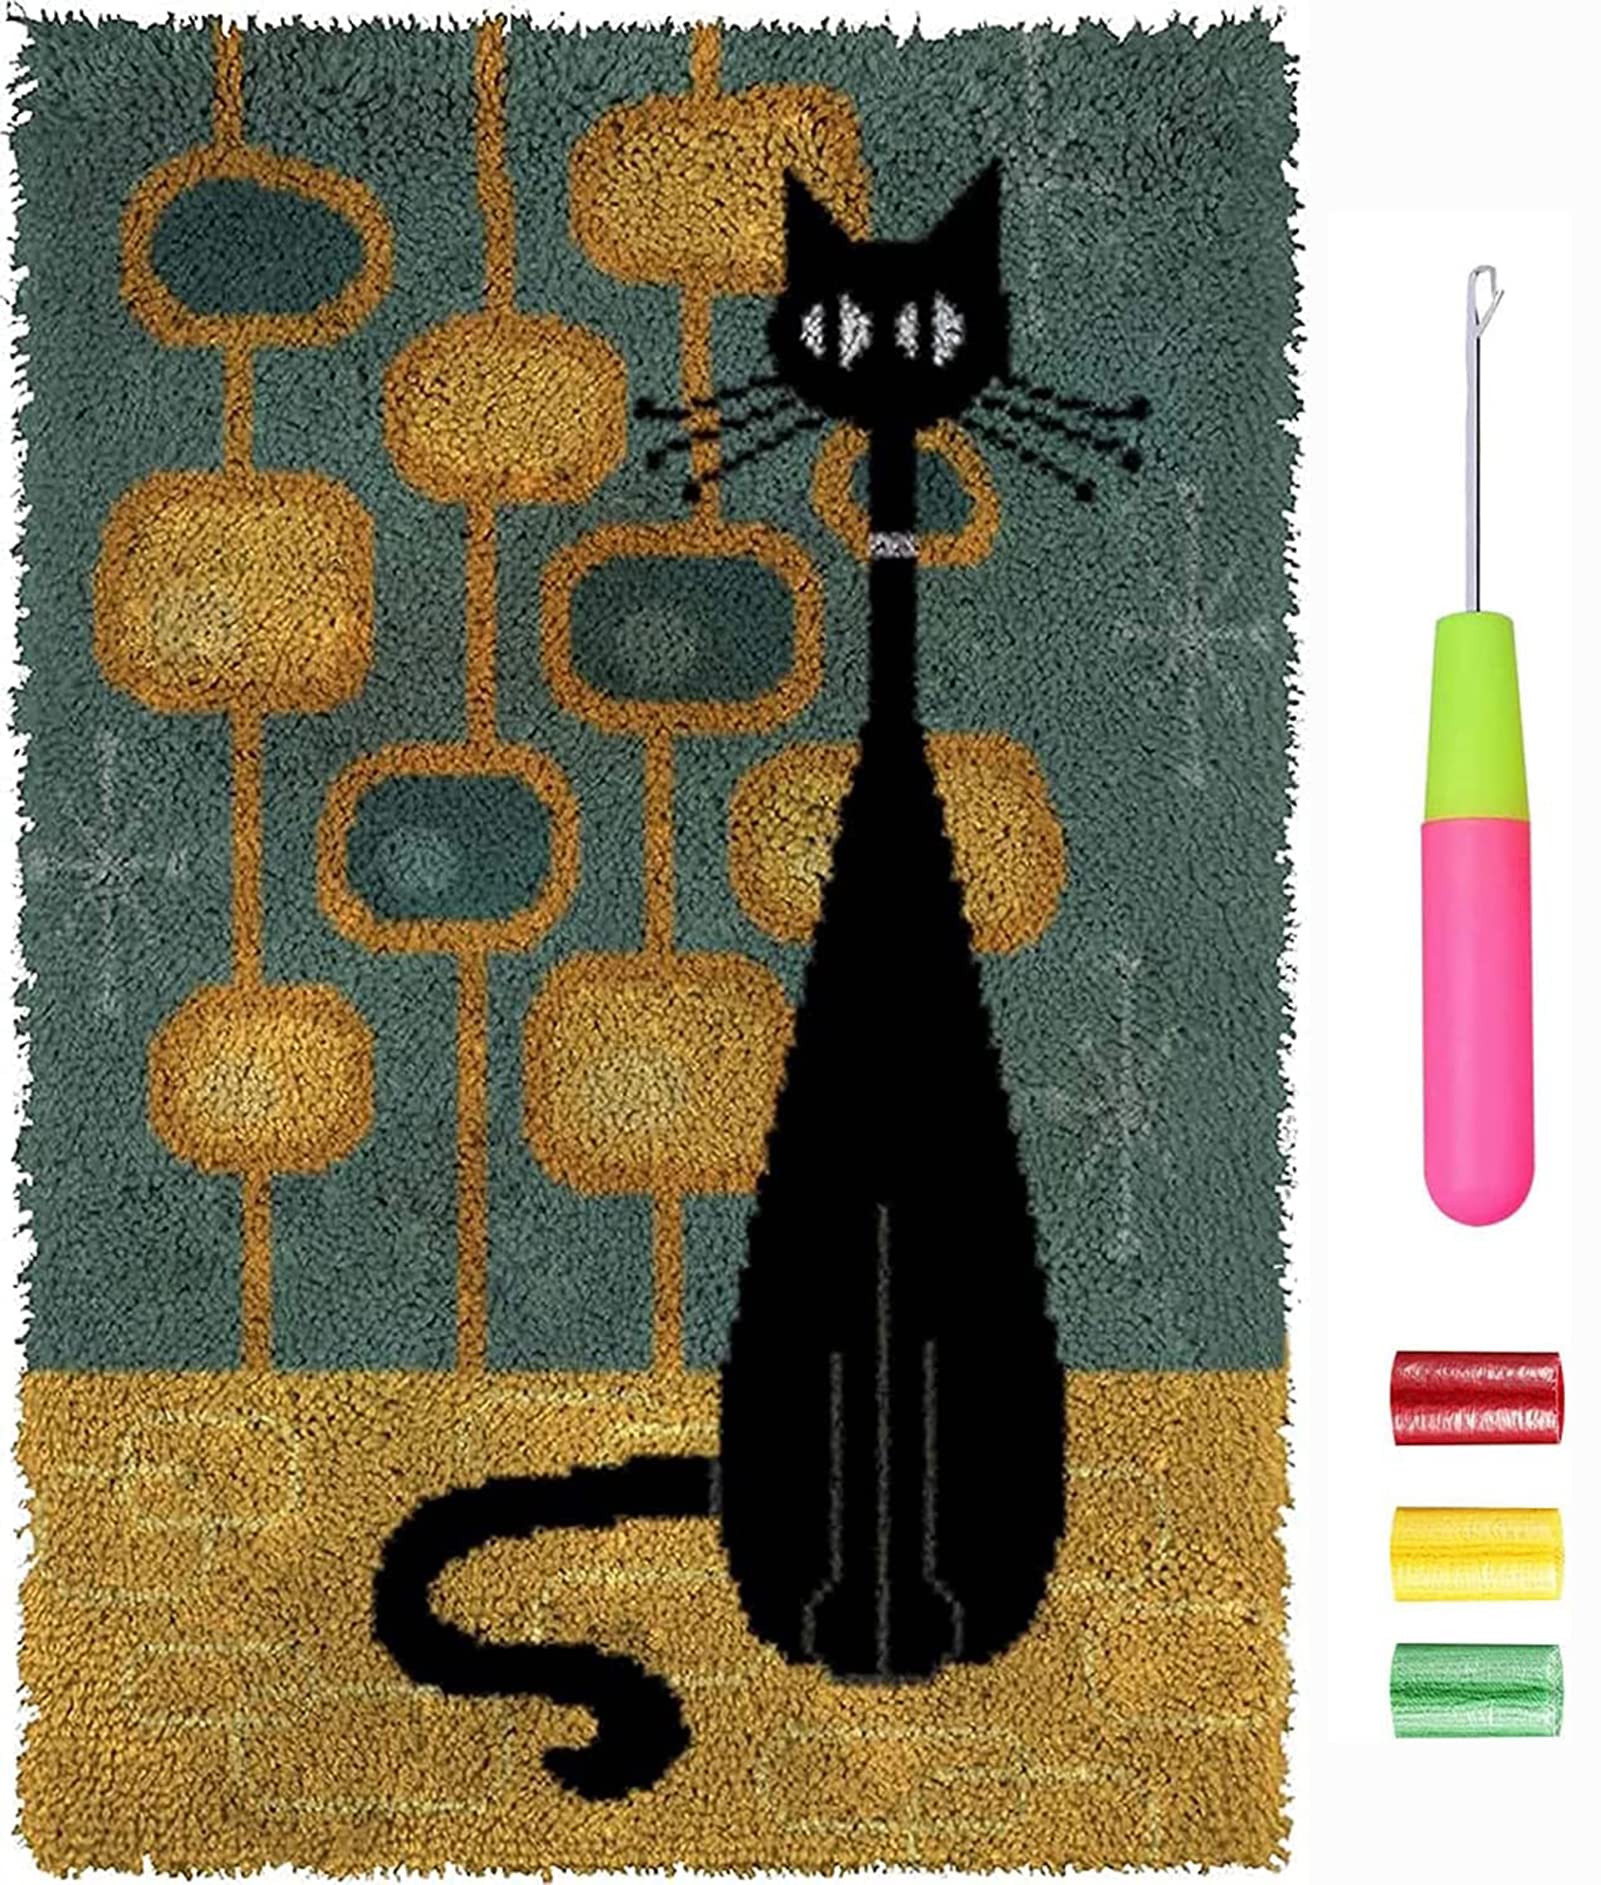 EVAJE Latch Hook Rug Kit for Adults DIY Crochet Yarn Kits with Color  Printed Canvas Black Cat Pattern Rug Making Craft Embroidery Tapestry Set  Home Decor Festival Gift 20.5''X14